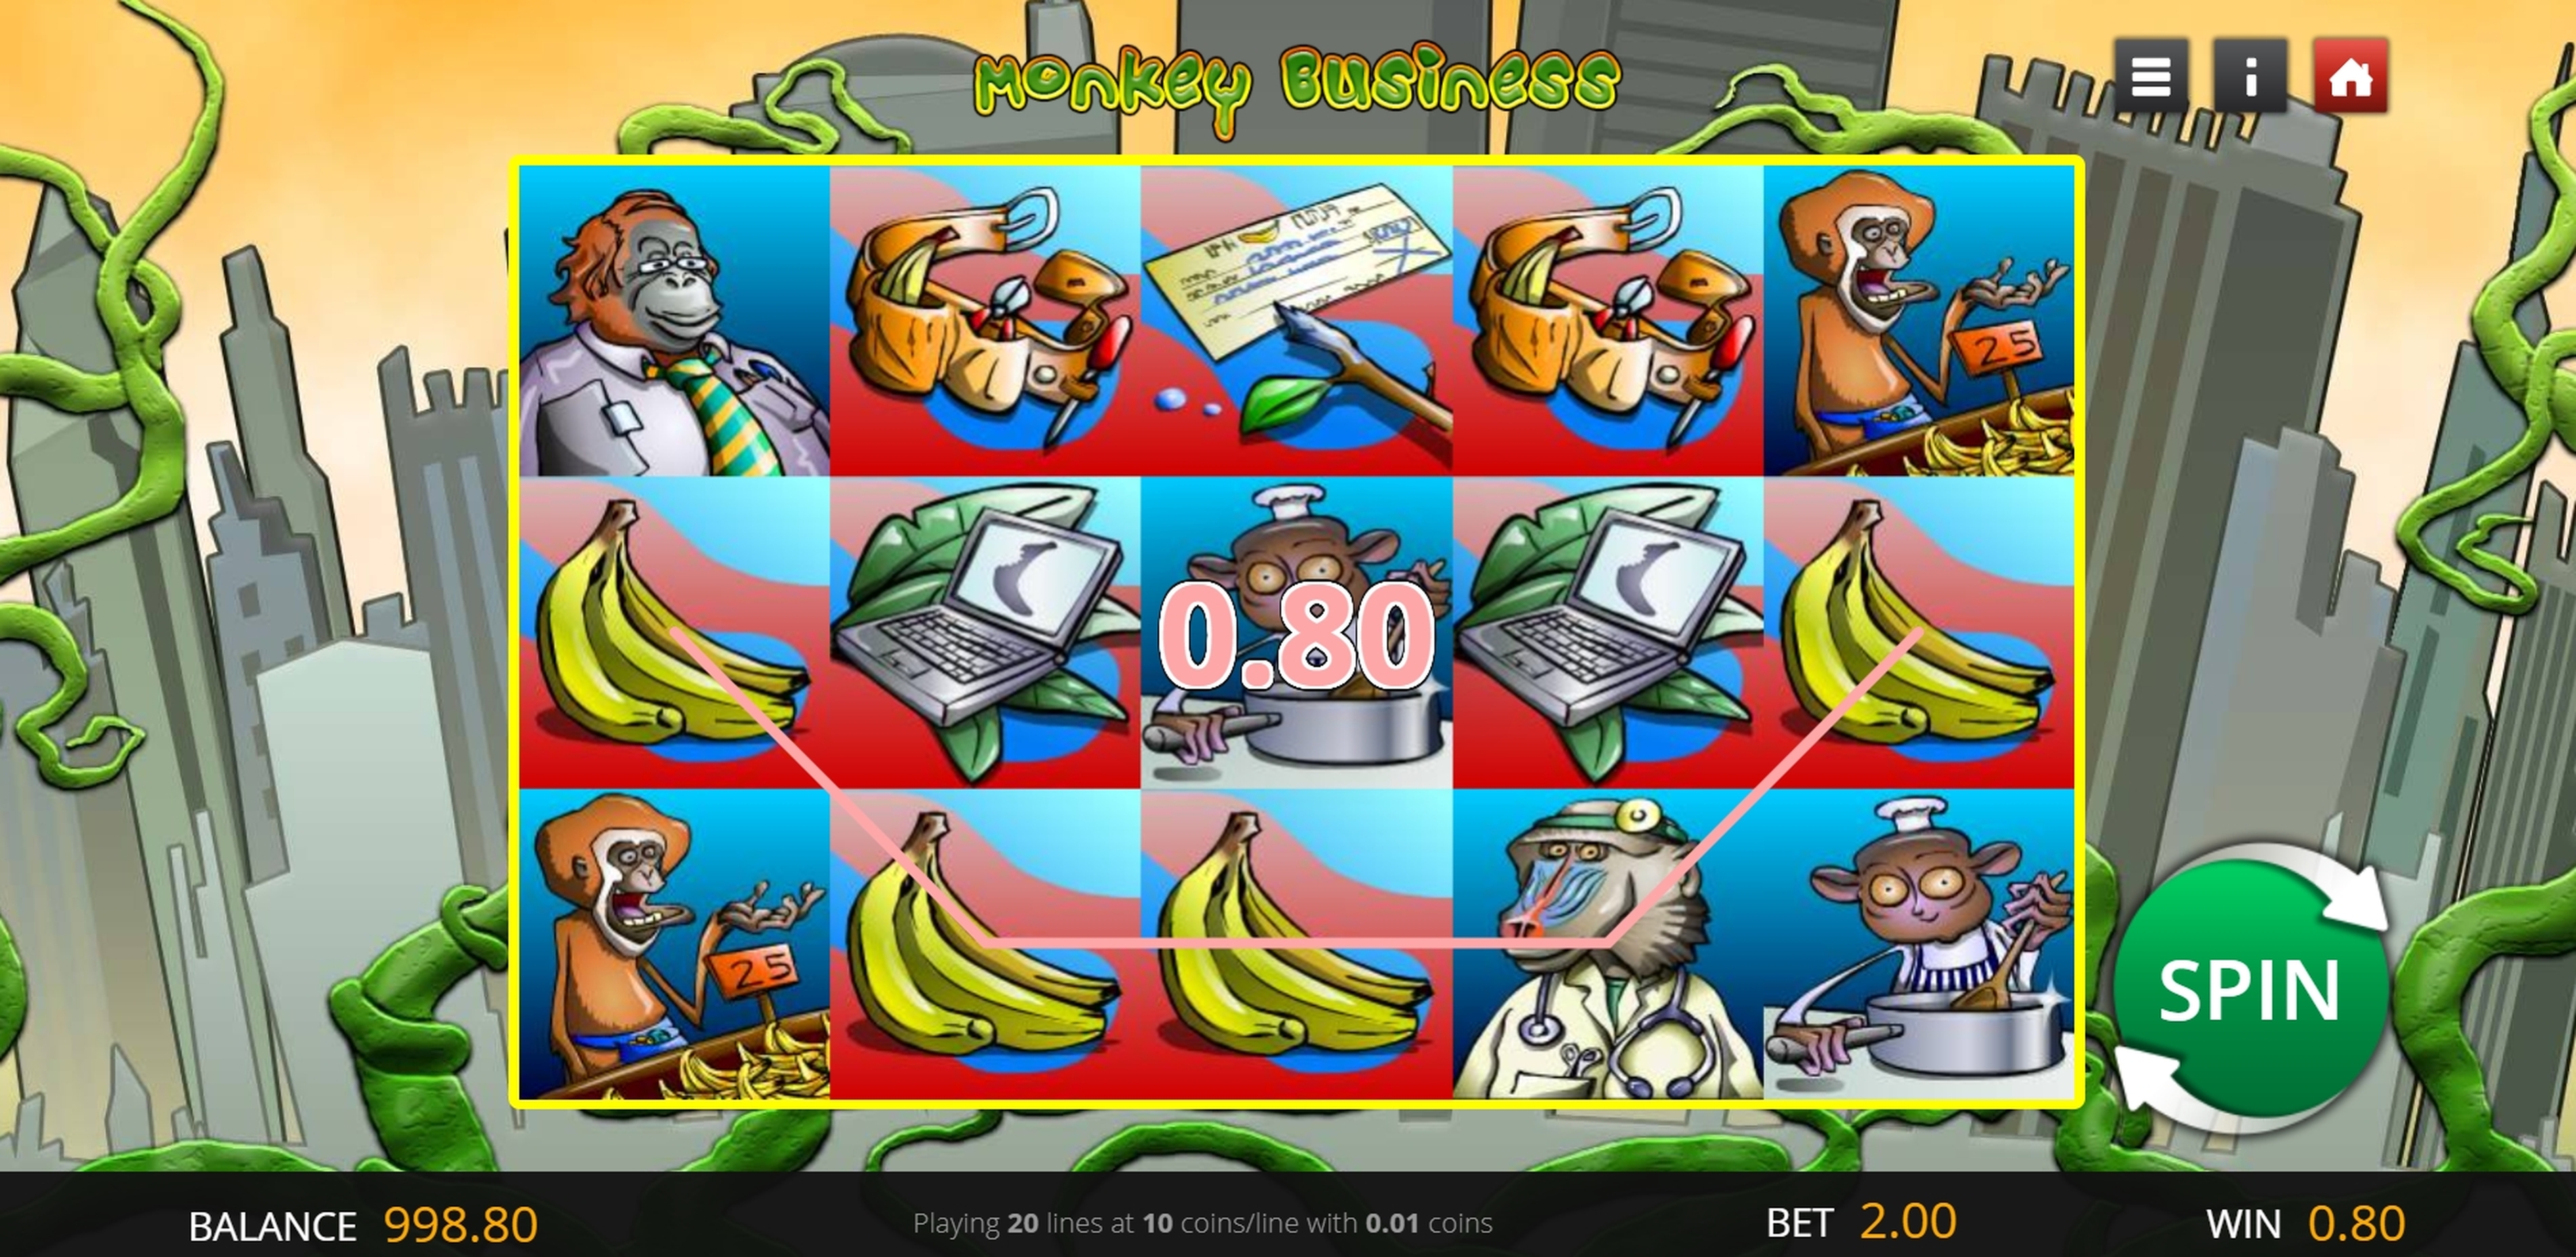 Win Money in Monkey Business Free Slot Game by Genii